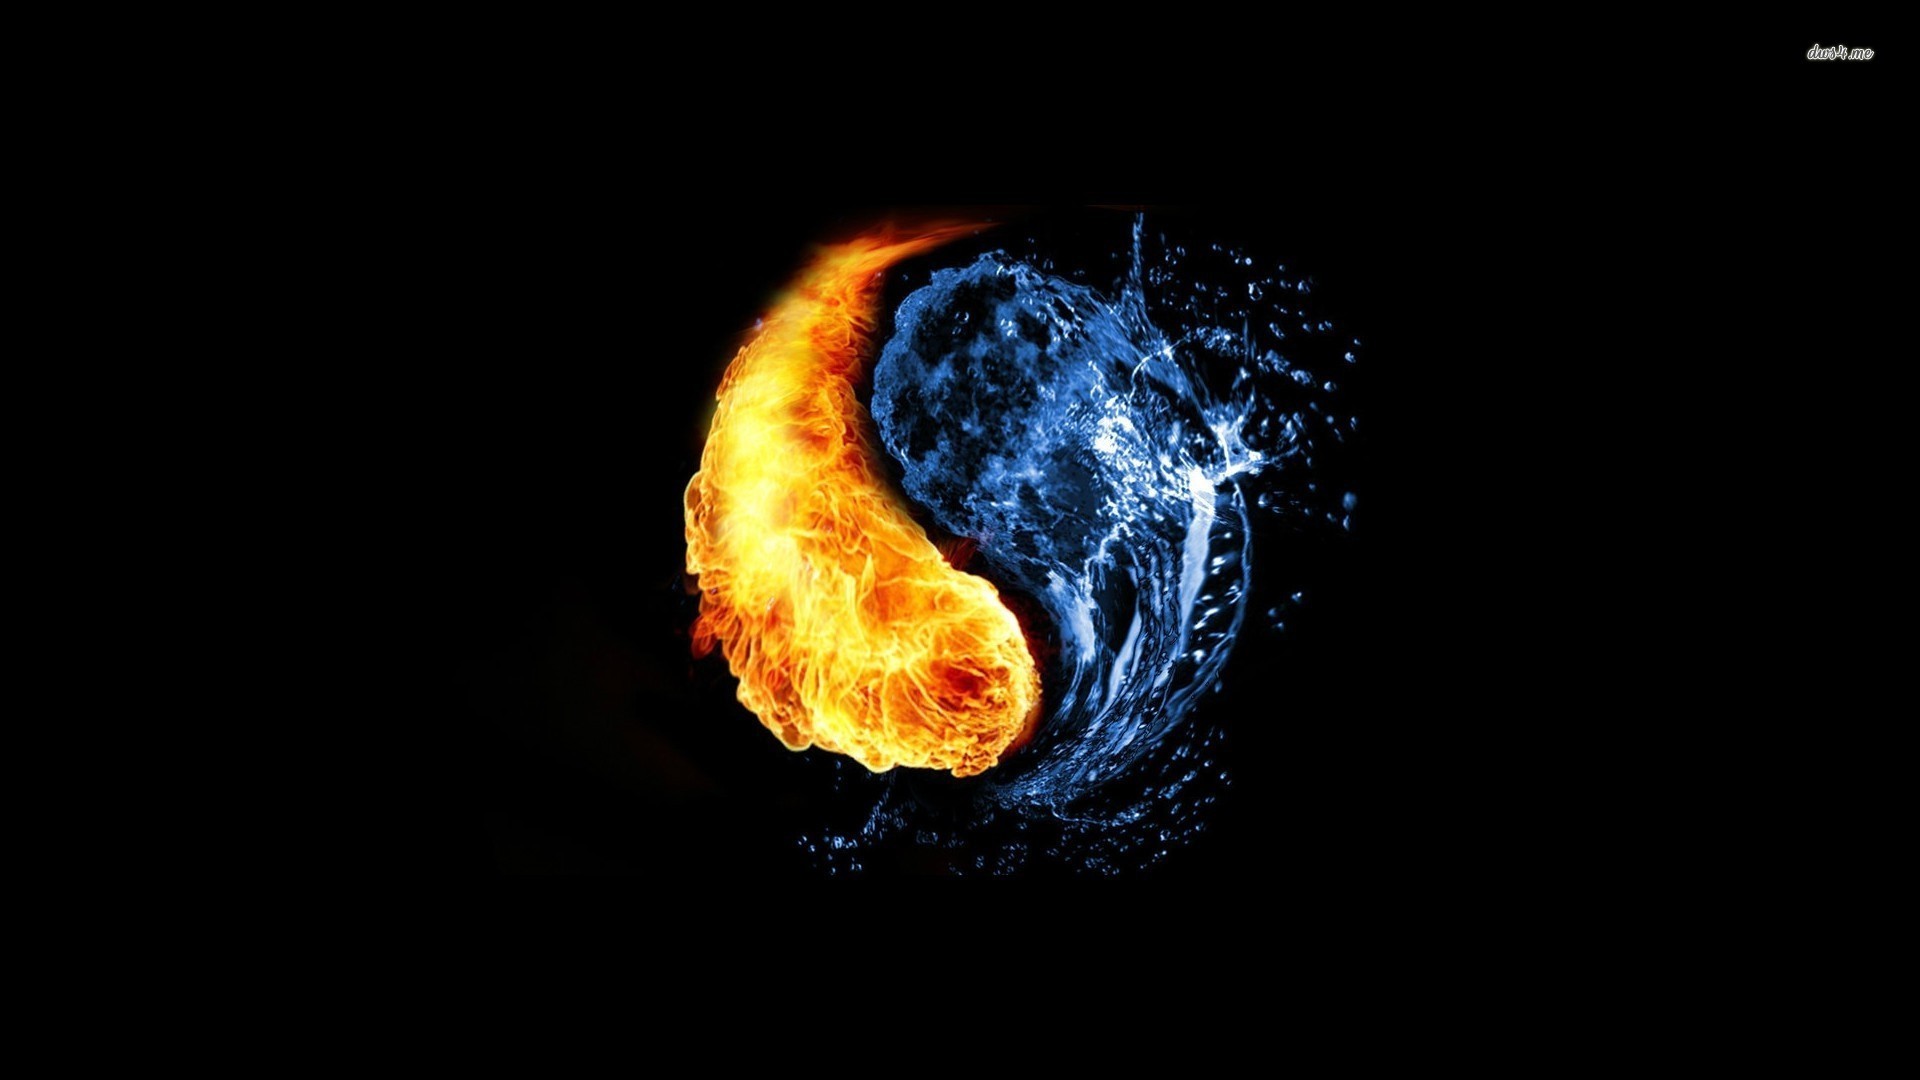 1920x1080 Fire And Water Wallpapers - Full HD wallpaper search